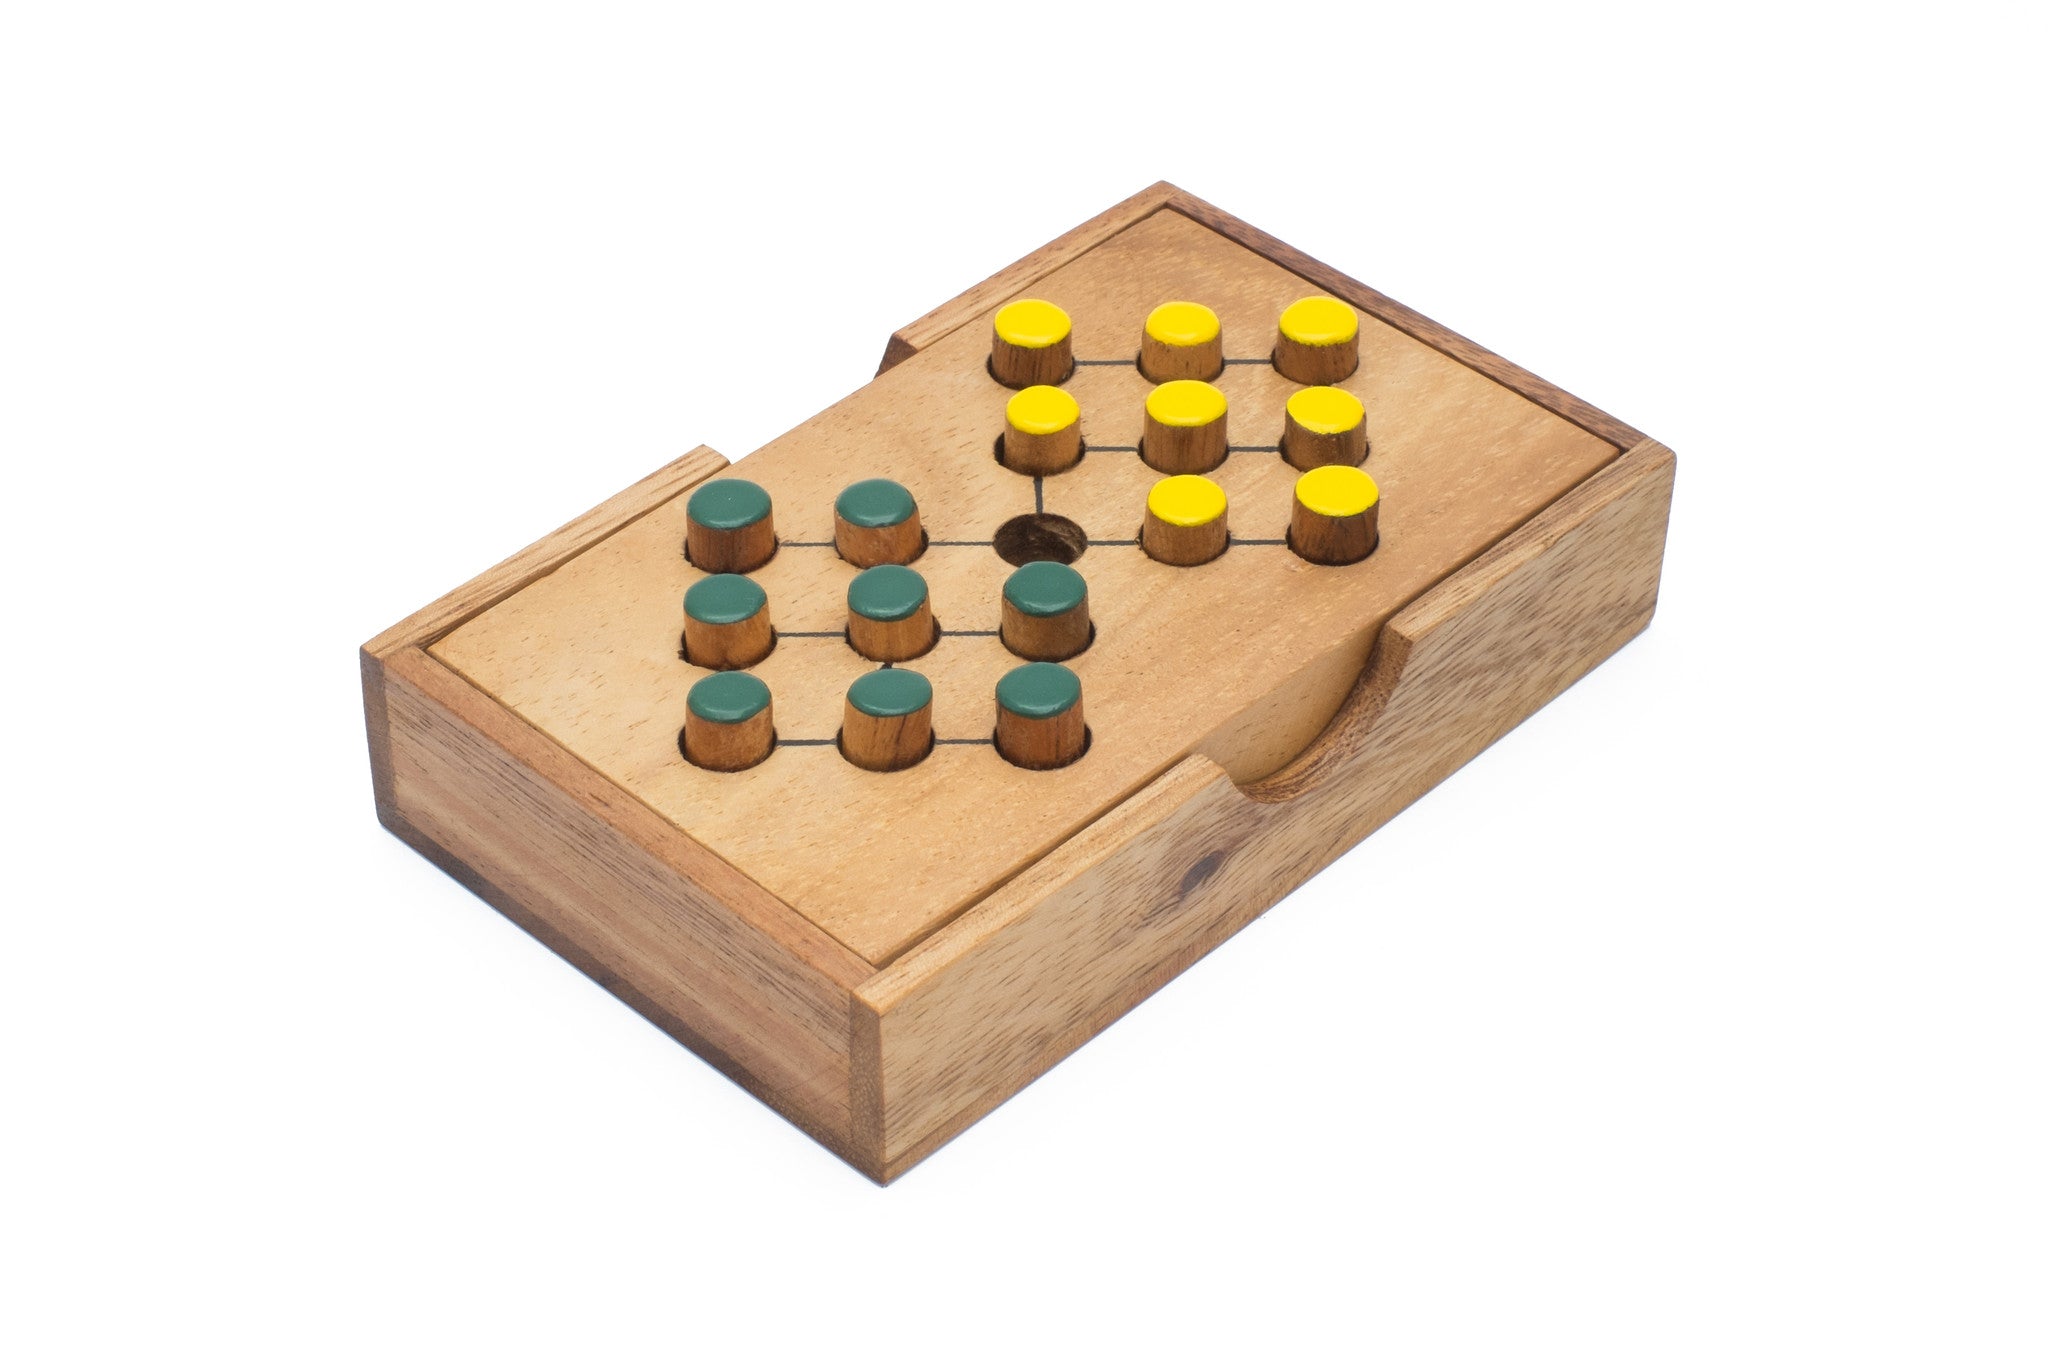 peg-solitaire-game-with-wooden-marbles-ubicaciondepersonas-cdmx-gob-mx